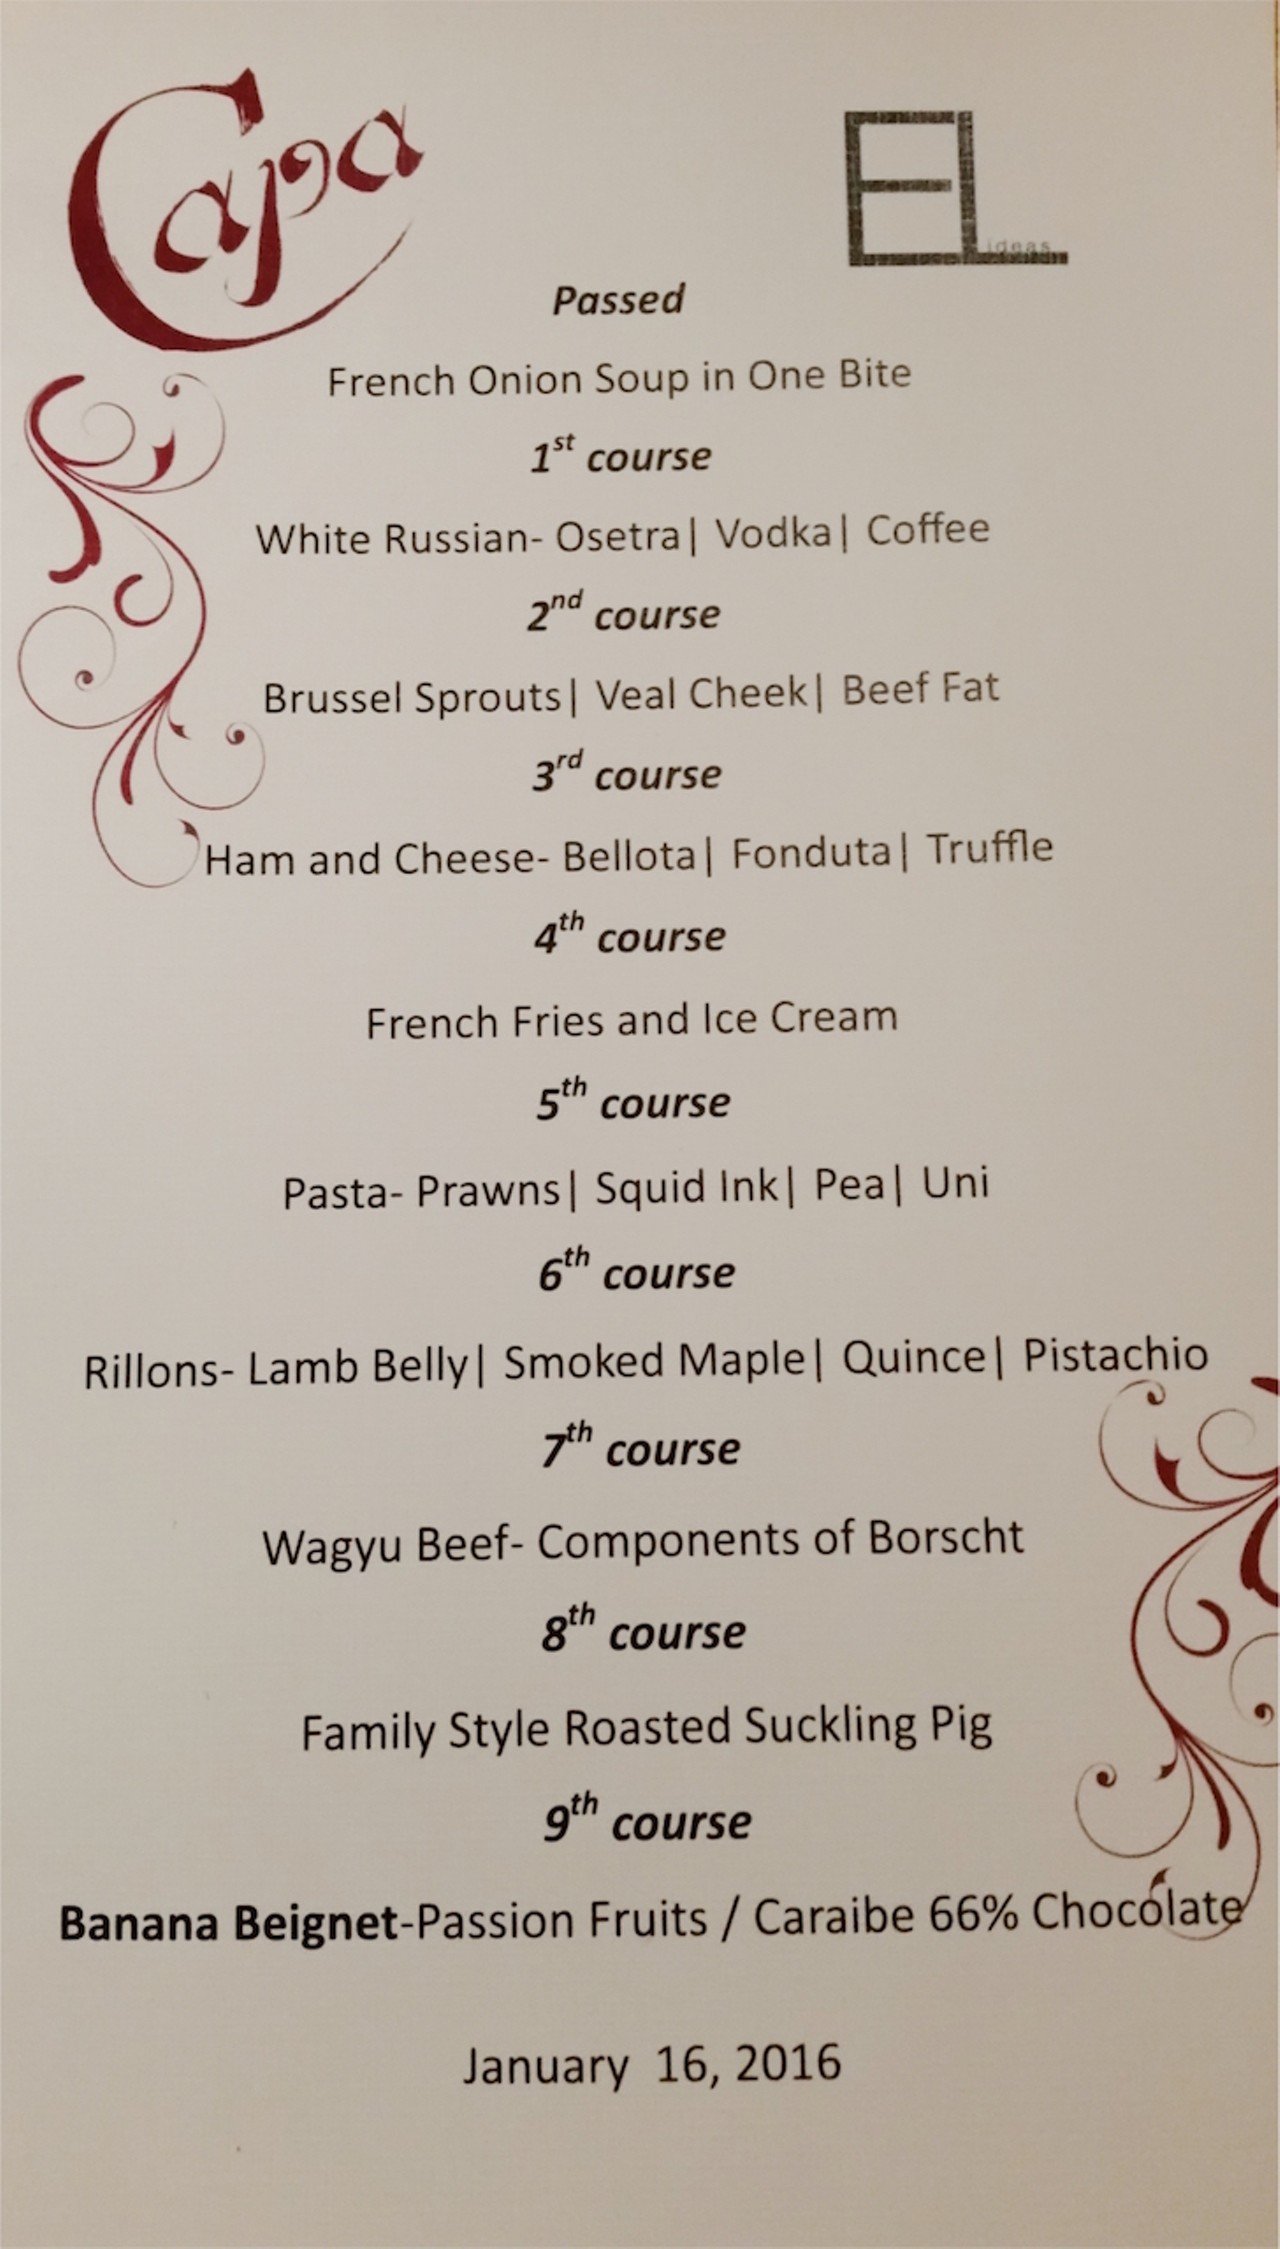 The menu for the evening